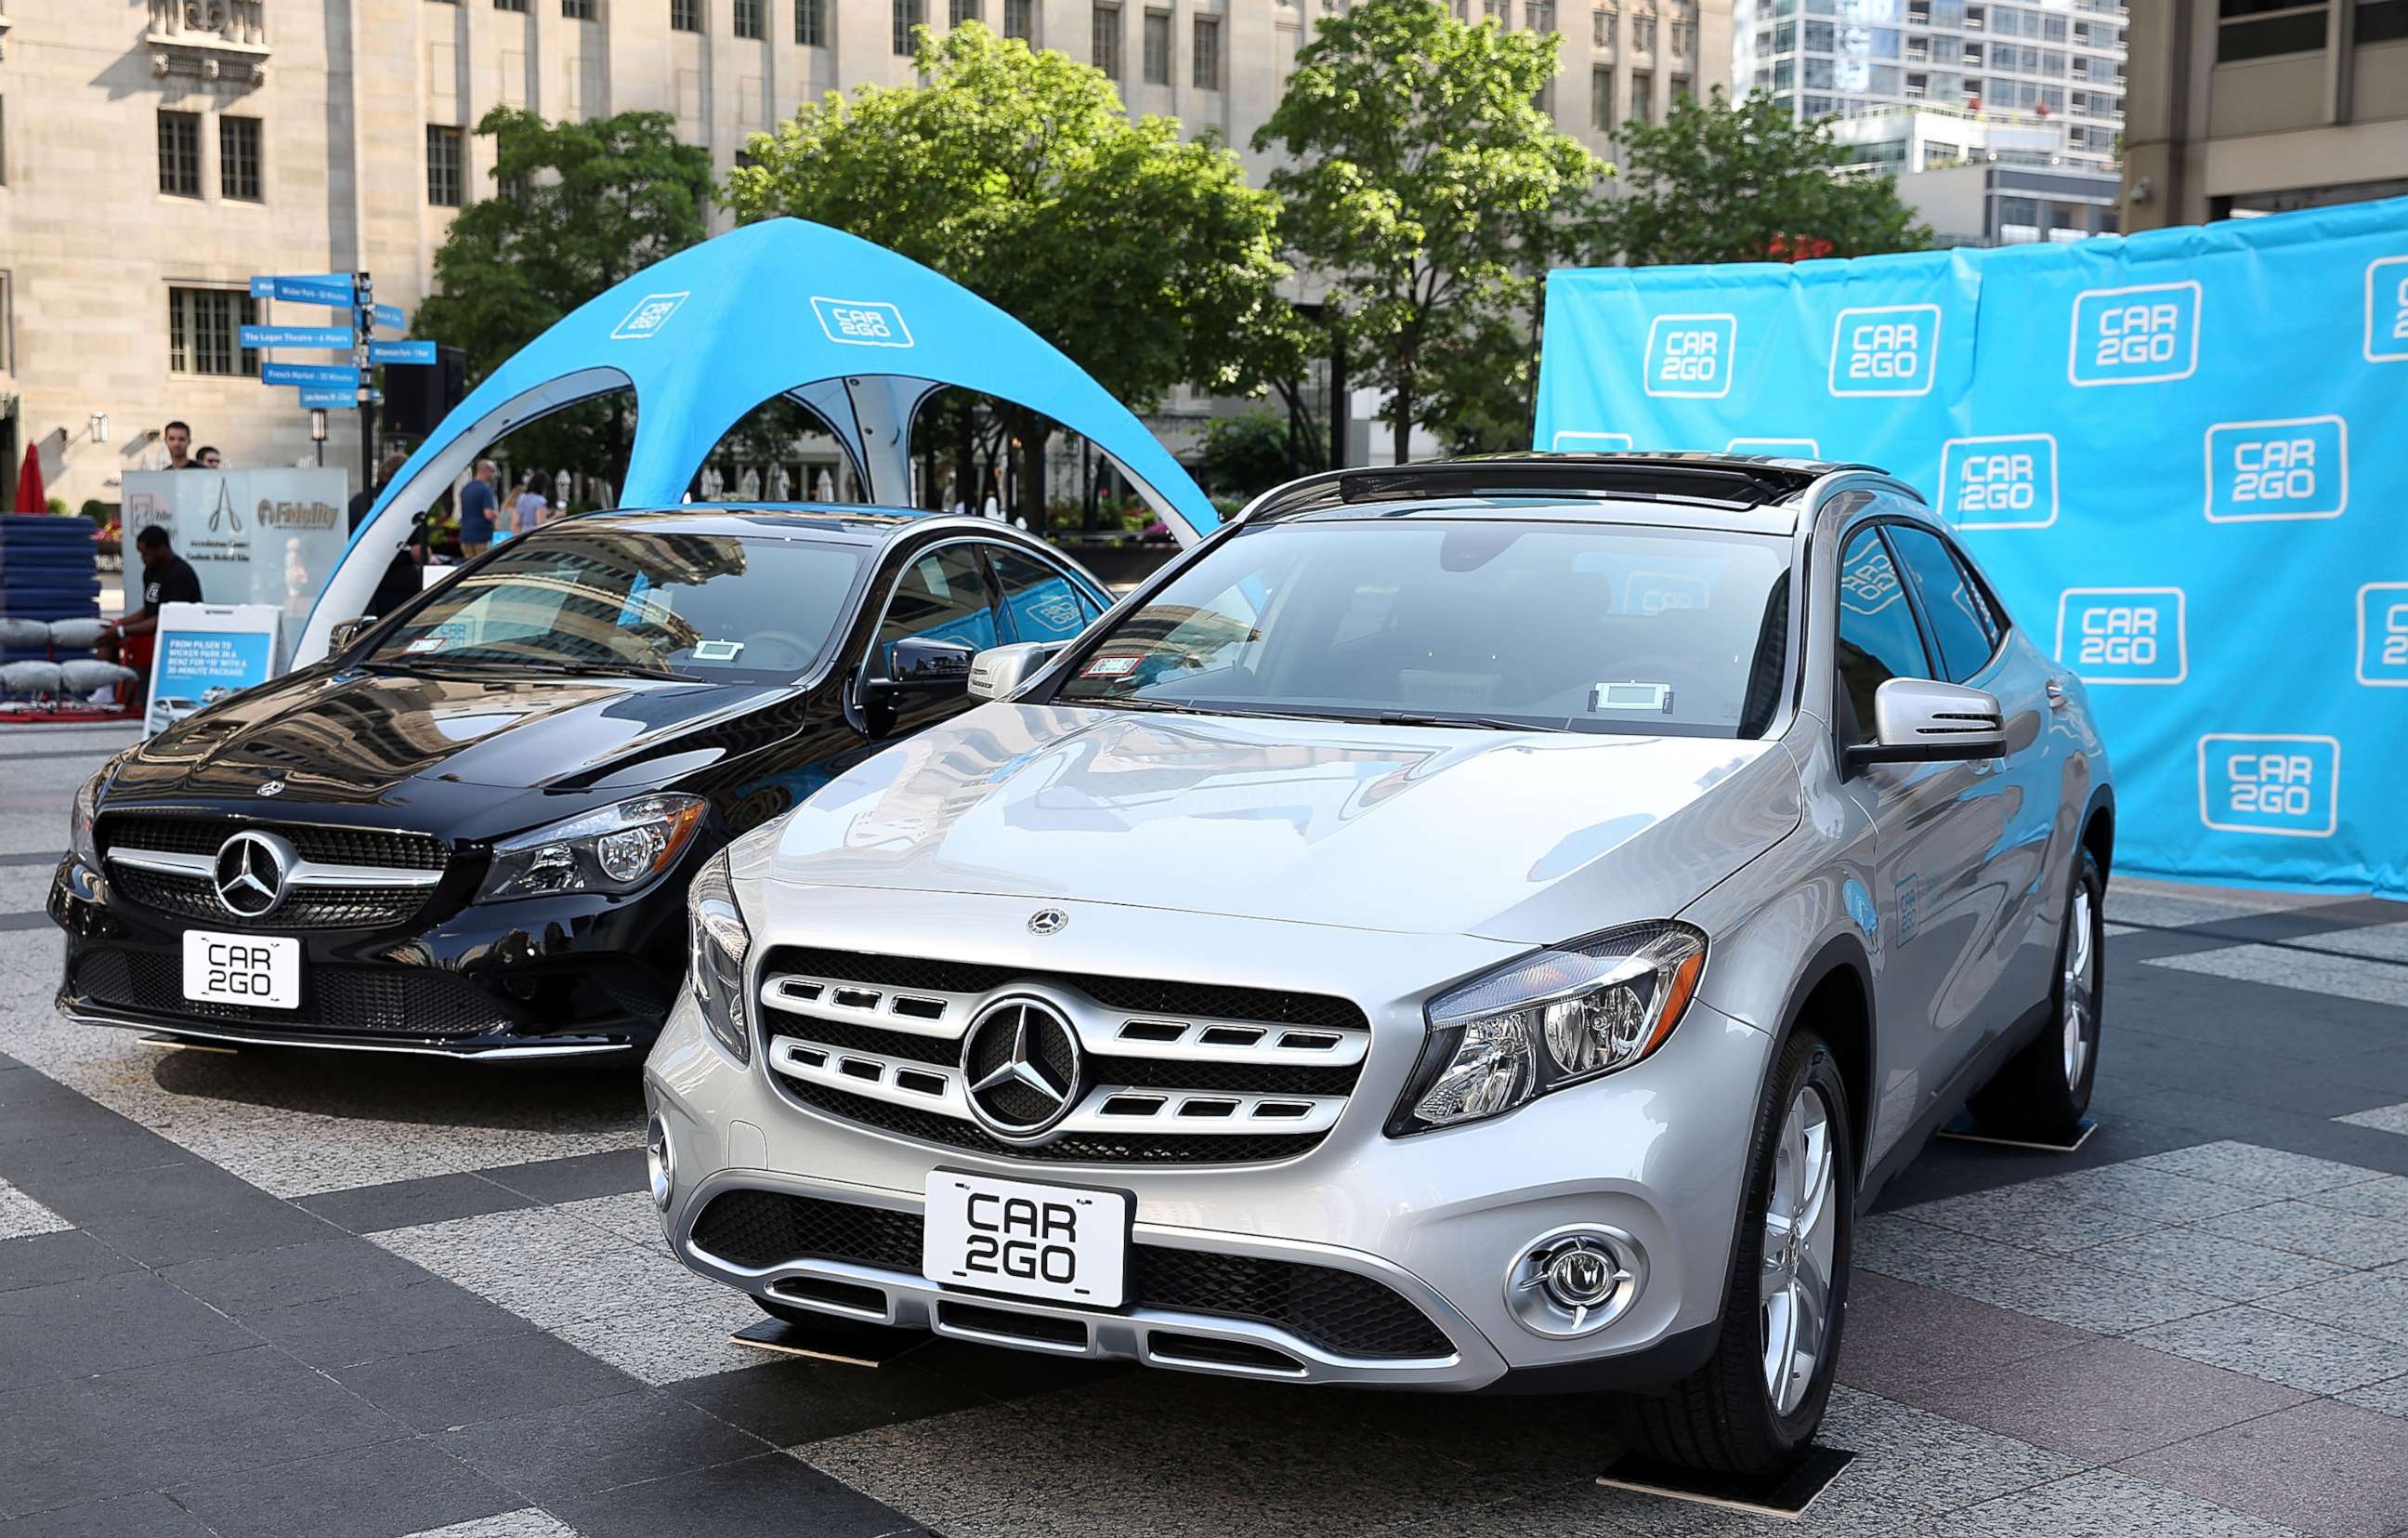 PHOTO: Car2go launches with new Mercedes-Benz CLA and GLA vehicles in Pioneer Court, Chicago, July 25, 2018.